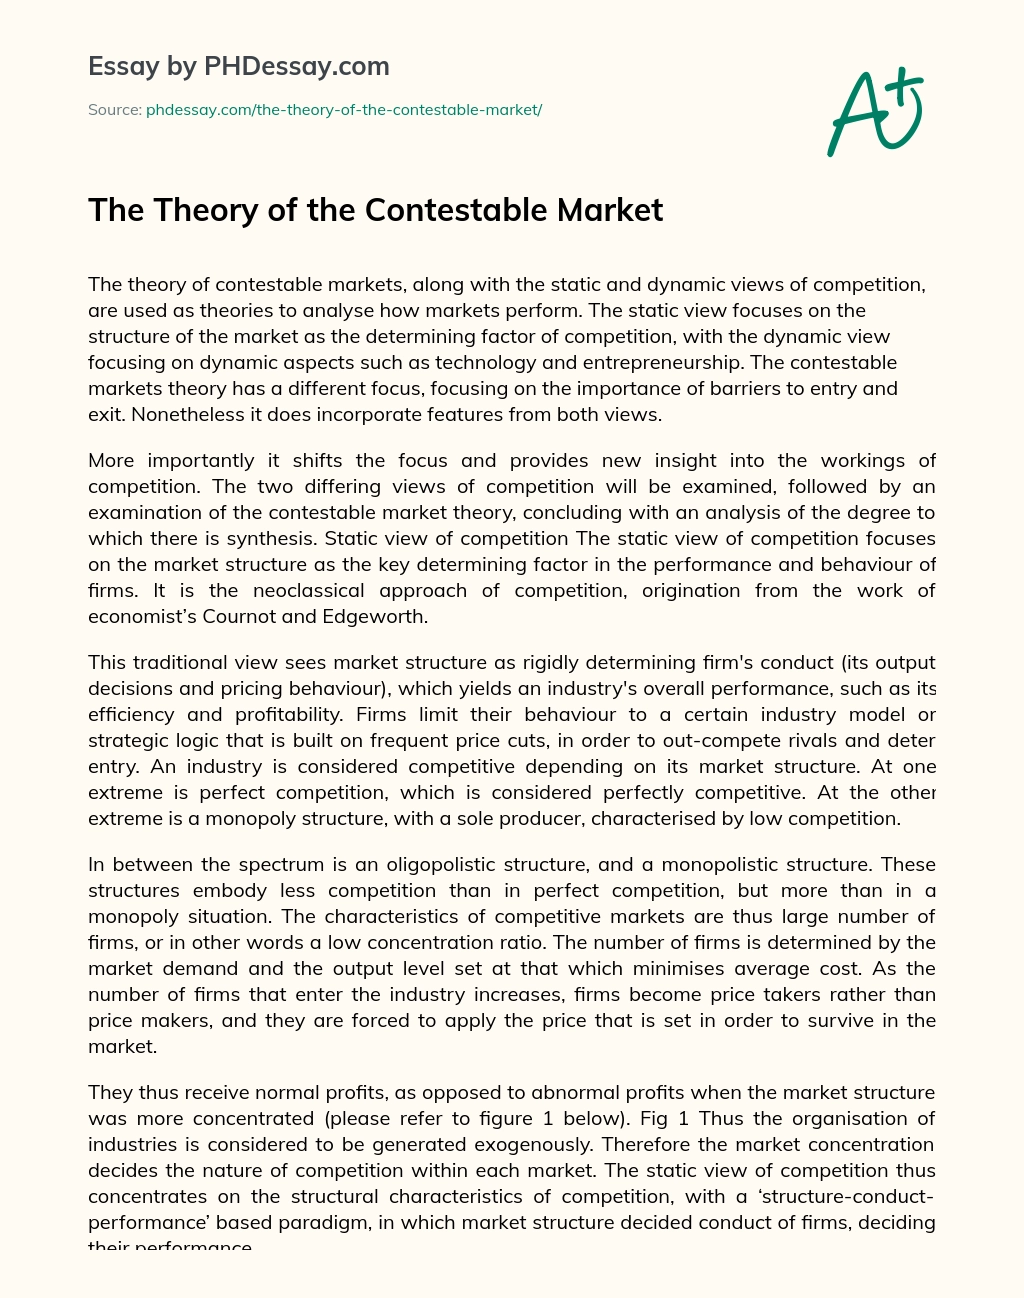 The Theory of the Contestable Market essay